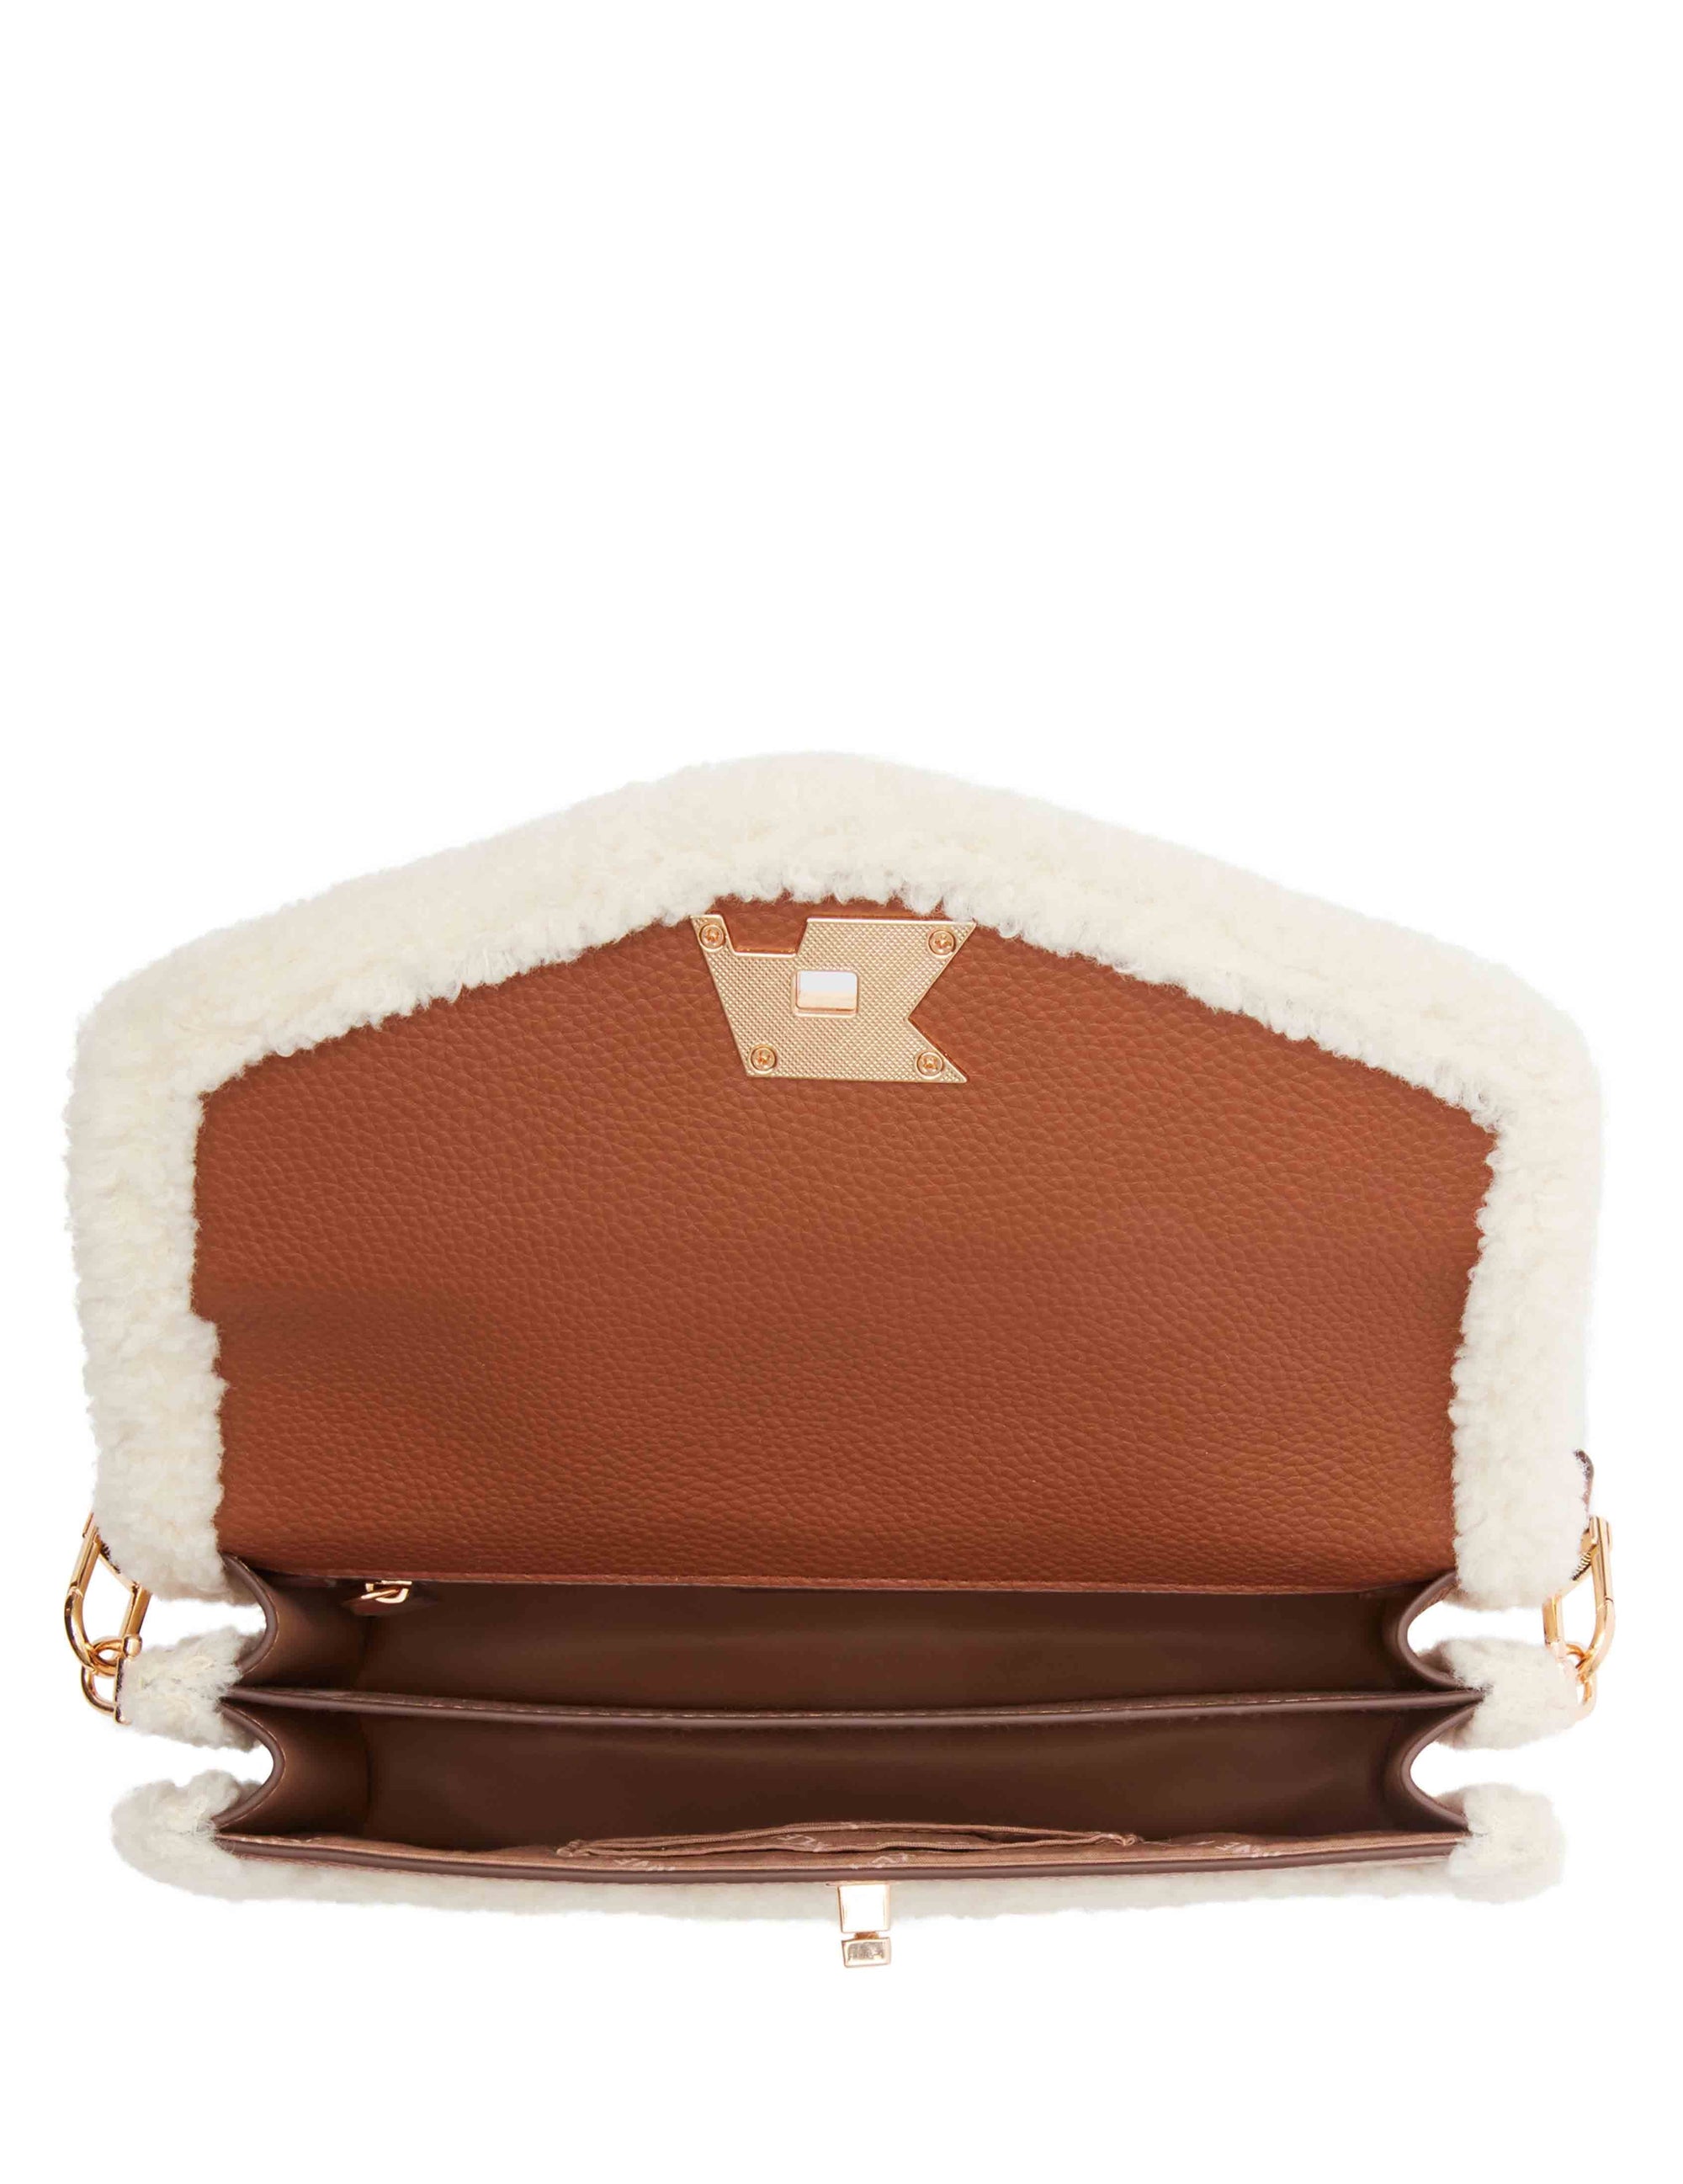 Thoughts about the new Shearling/Sherpa bags coming out? I like